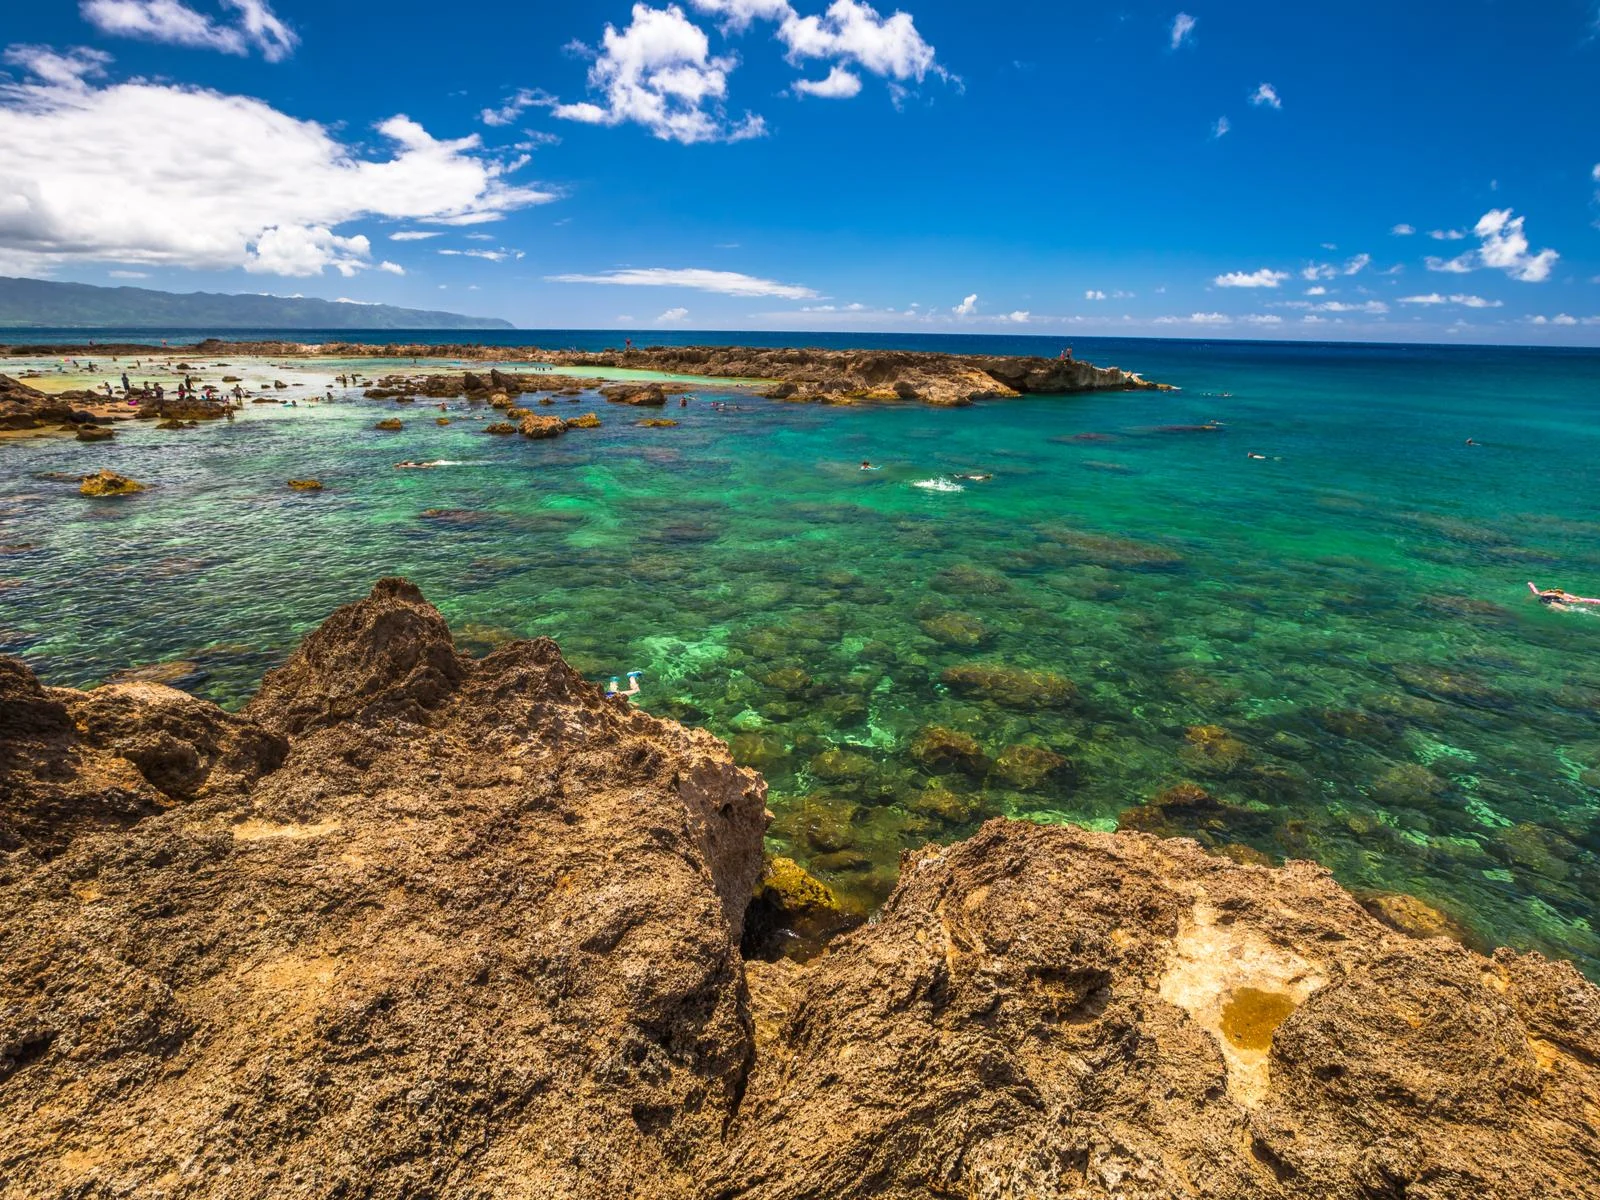 Coral reefs seen from a rock at Shark's Cove in Oahu, one of the best snorkeling spots in Hawaii, where few people are snorkeling on a clear summer day